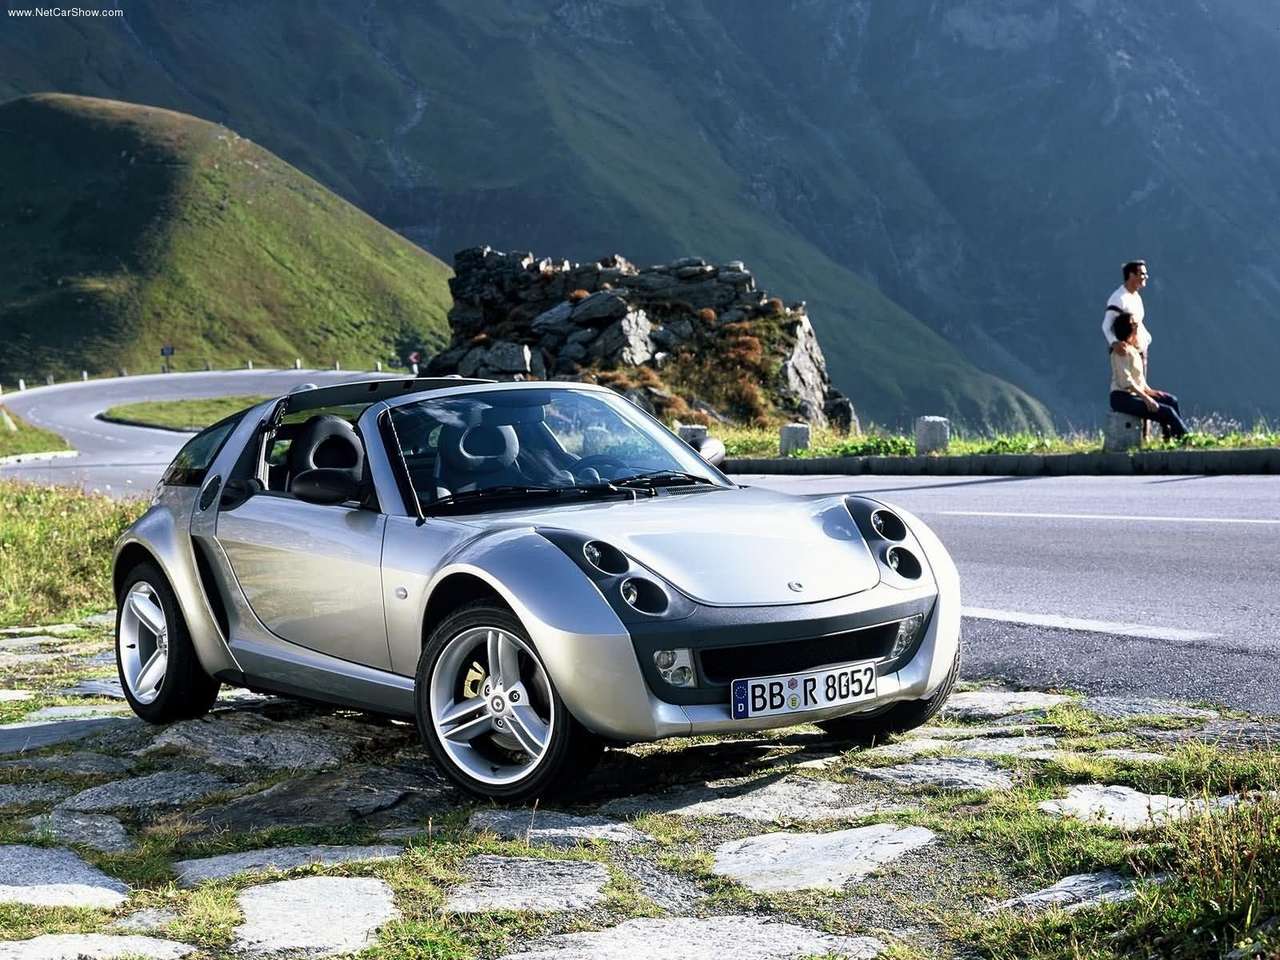 mcc smart roadster coupe-pic. 1